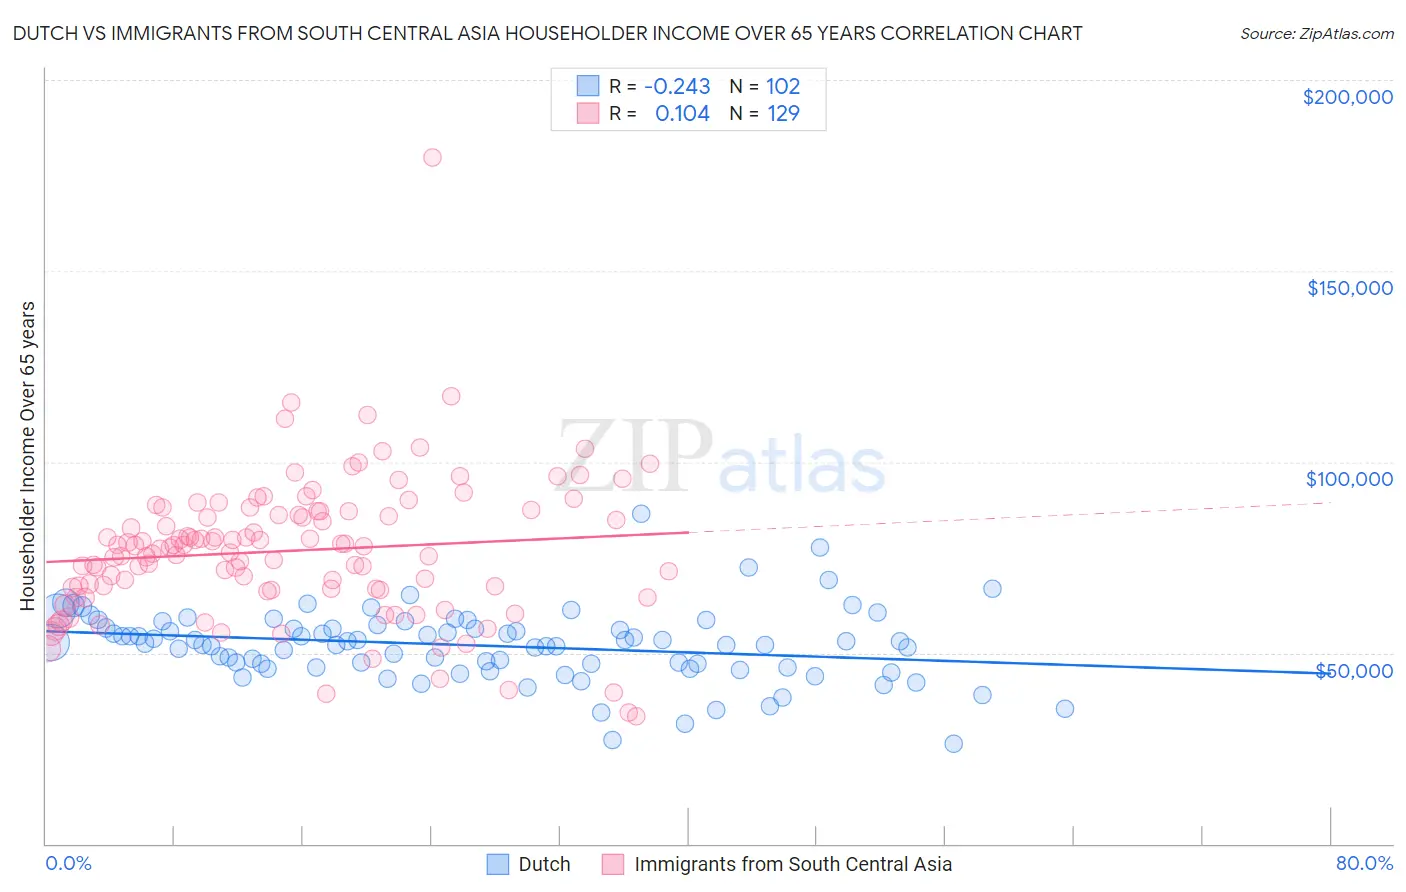 Dutch vs Immigrants from South Central Asia Householder Income Over 65 years